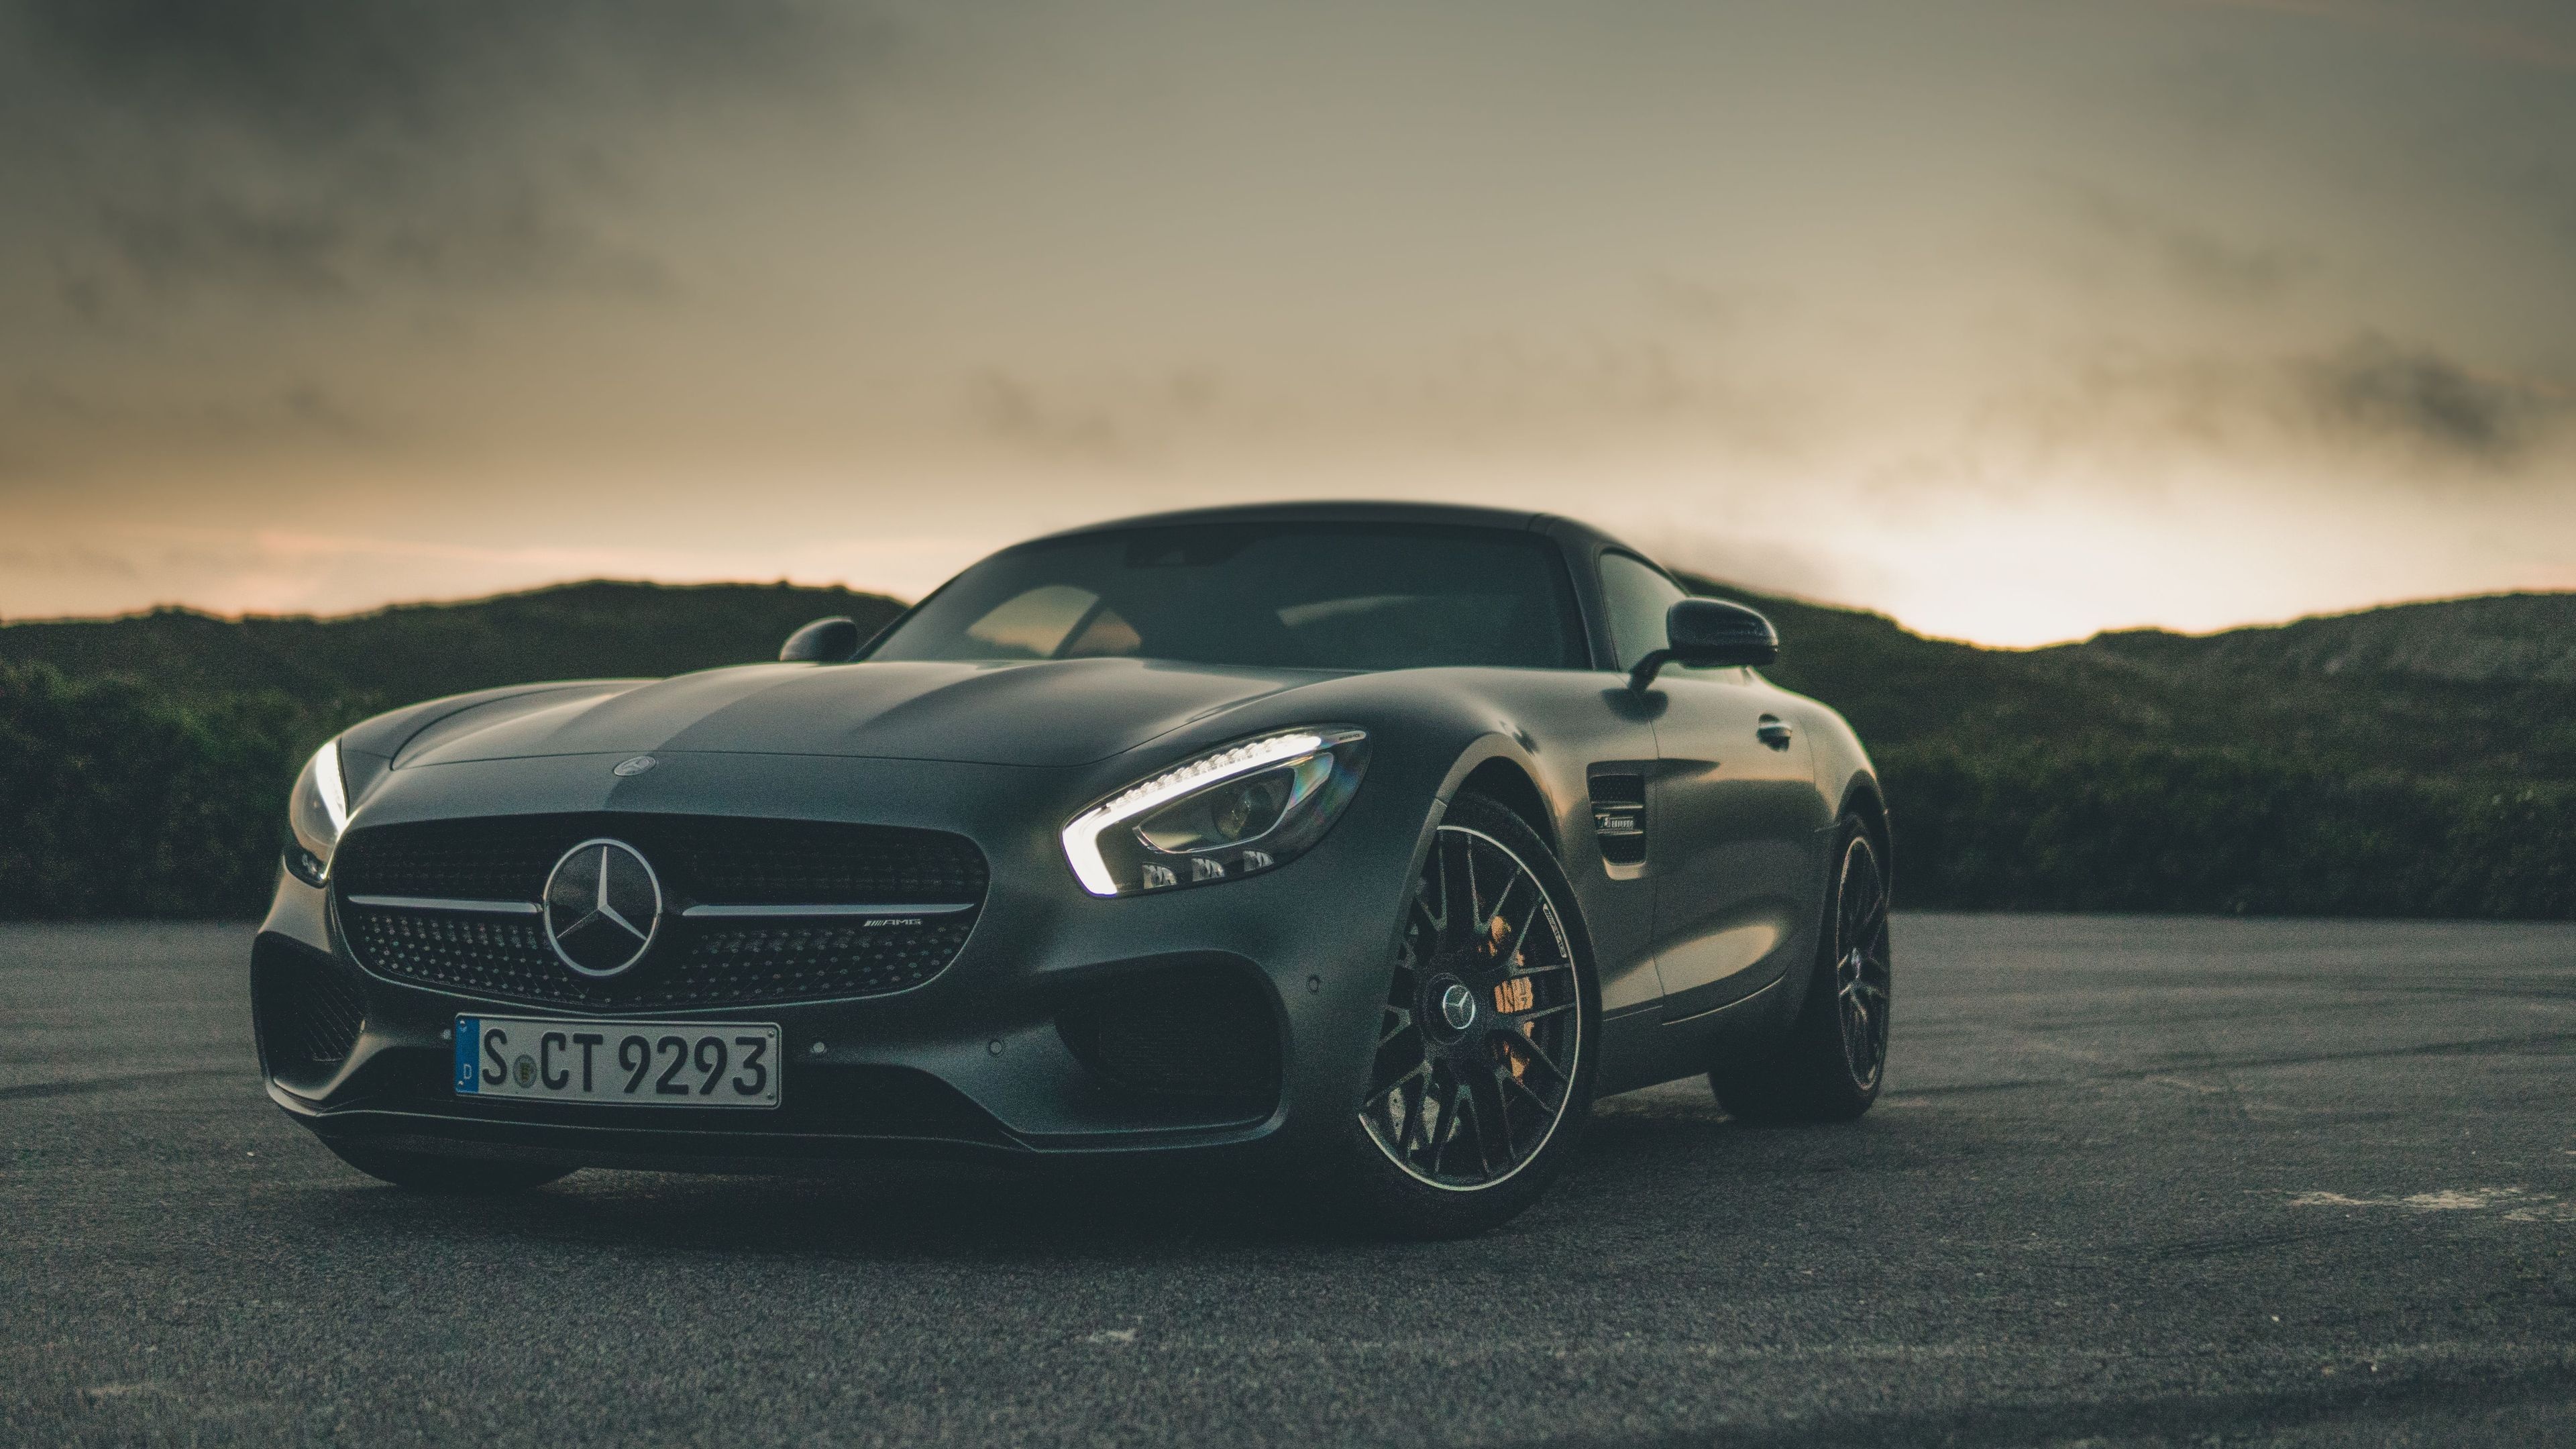 Sports Car: Mercedes, Exhilarating driving experience. 3840x2160 4K Wallpaper.